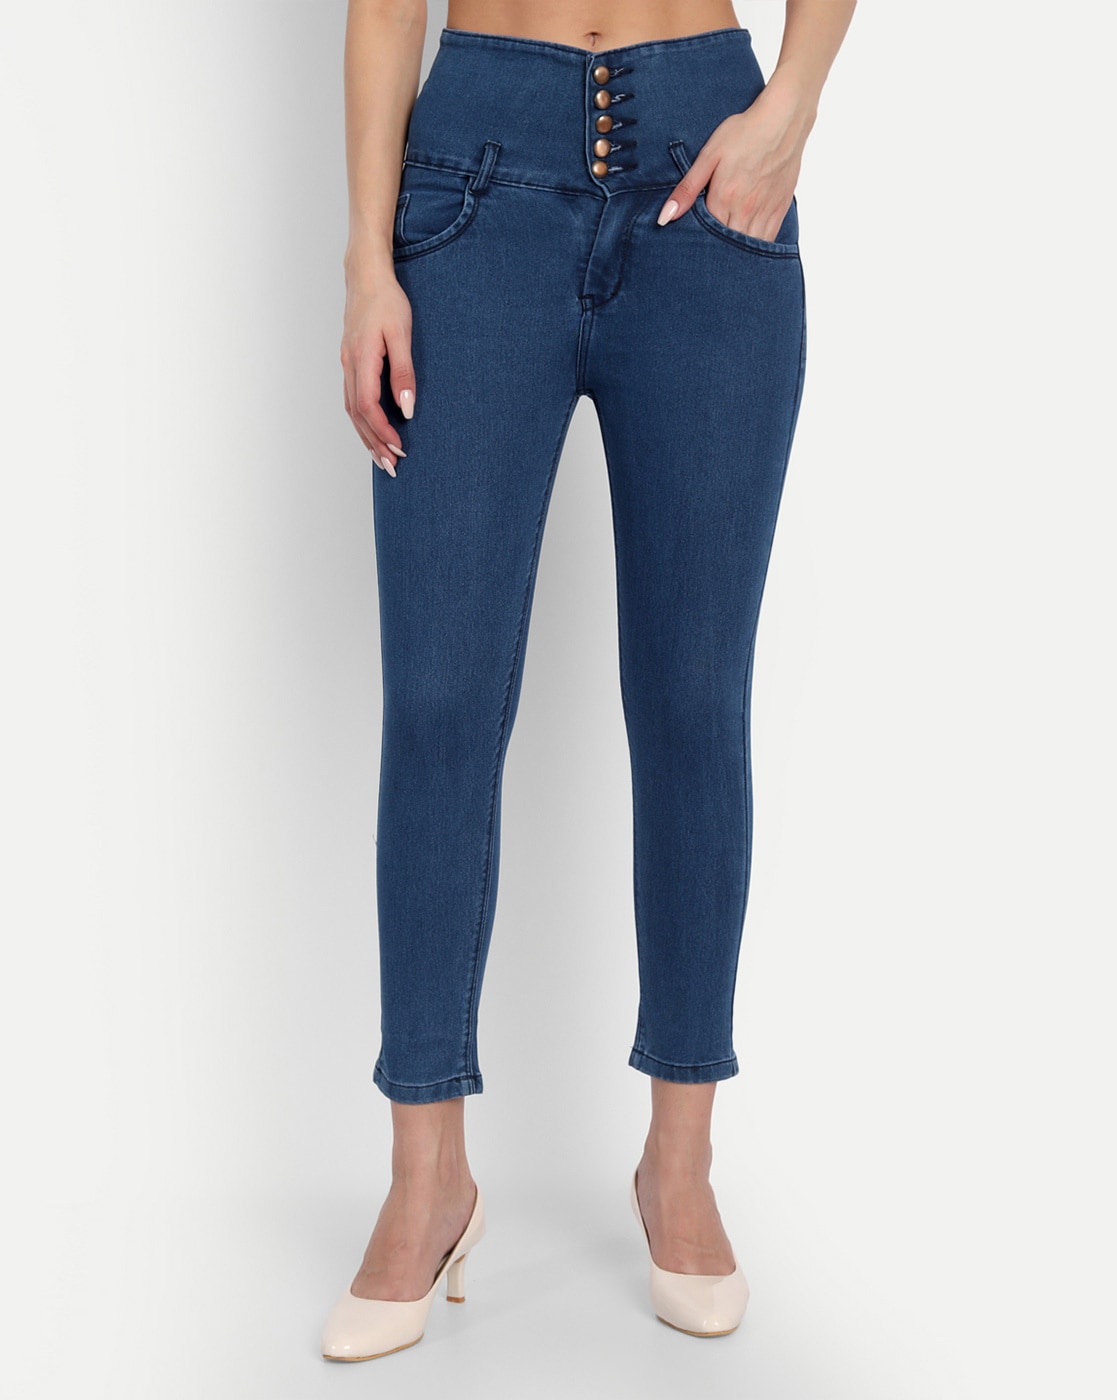 FitsYou Extra High-Waisted Rockstar Super-Skinny Jeans | Old Navy